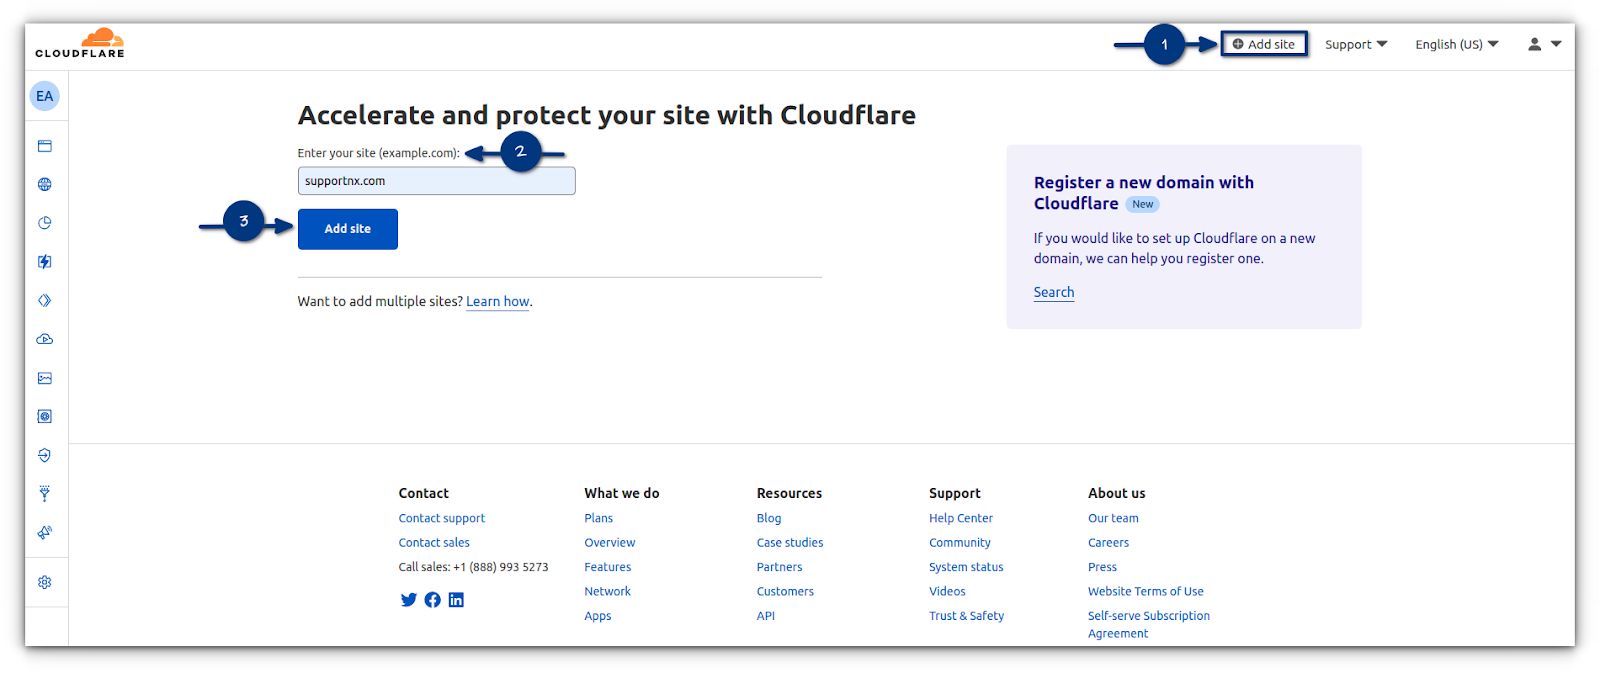 Once you have created an account at Cloudflare, find the +Add Site button at the top right of the screen. Enter your domain name into the box. By removing http:// and www parts from the front of the domain if you are pasting it.